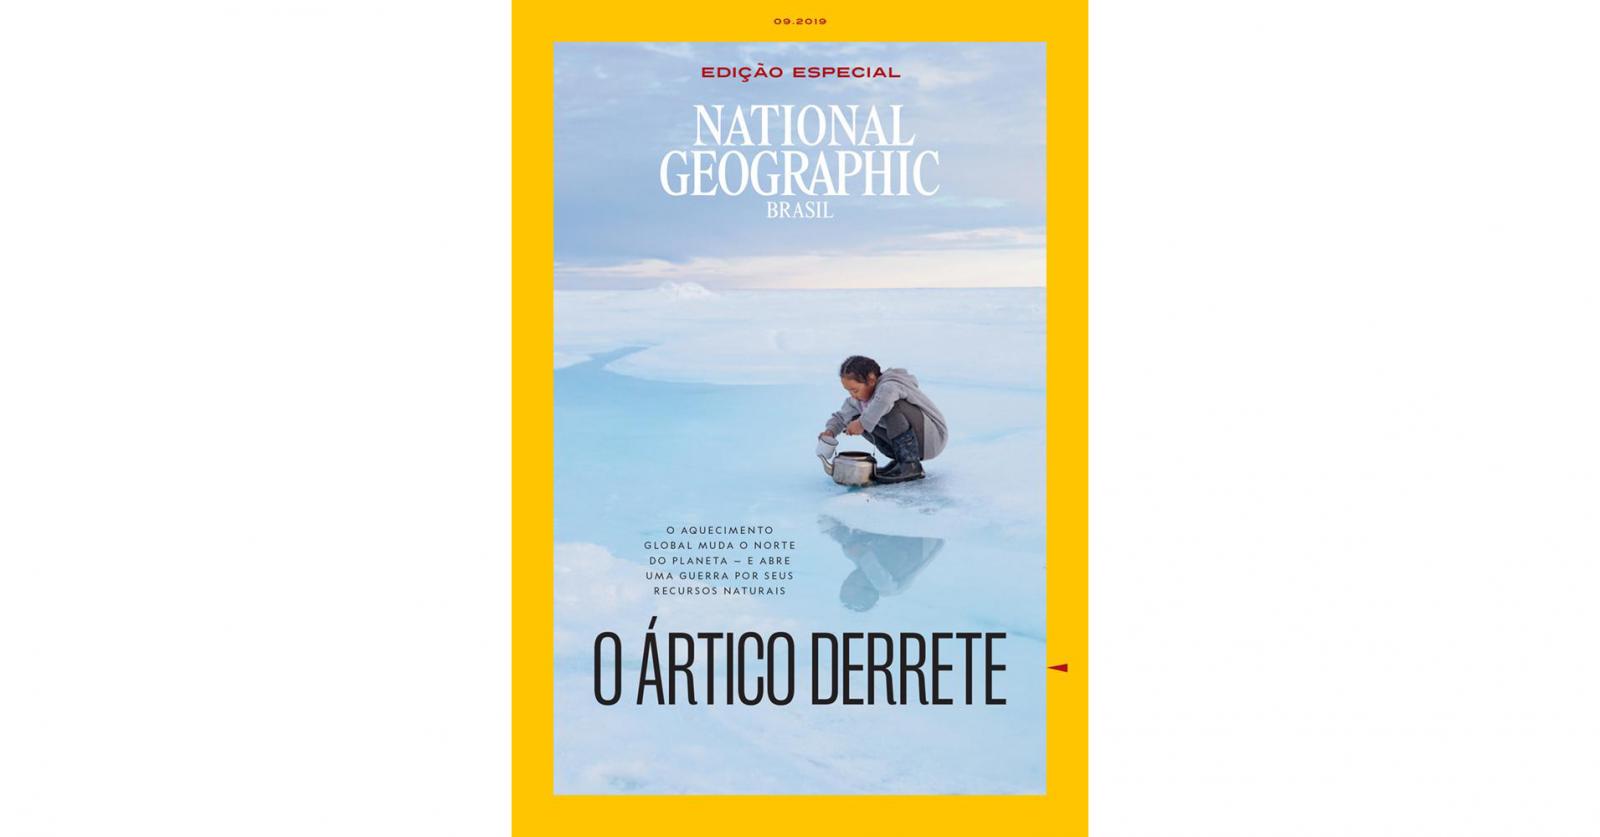 Thumbnail of National Geographic in Print